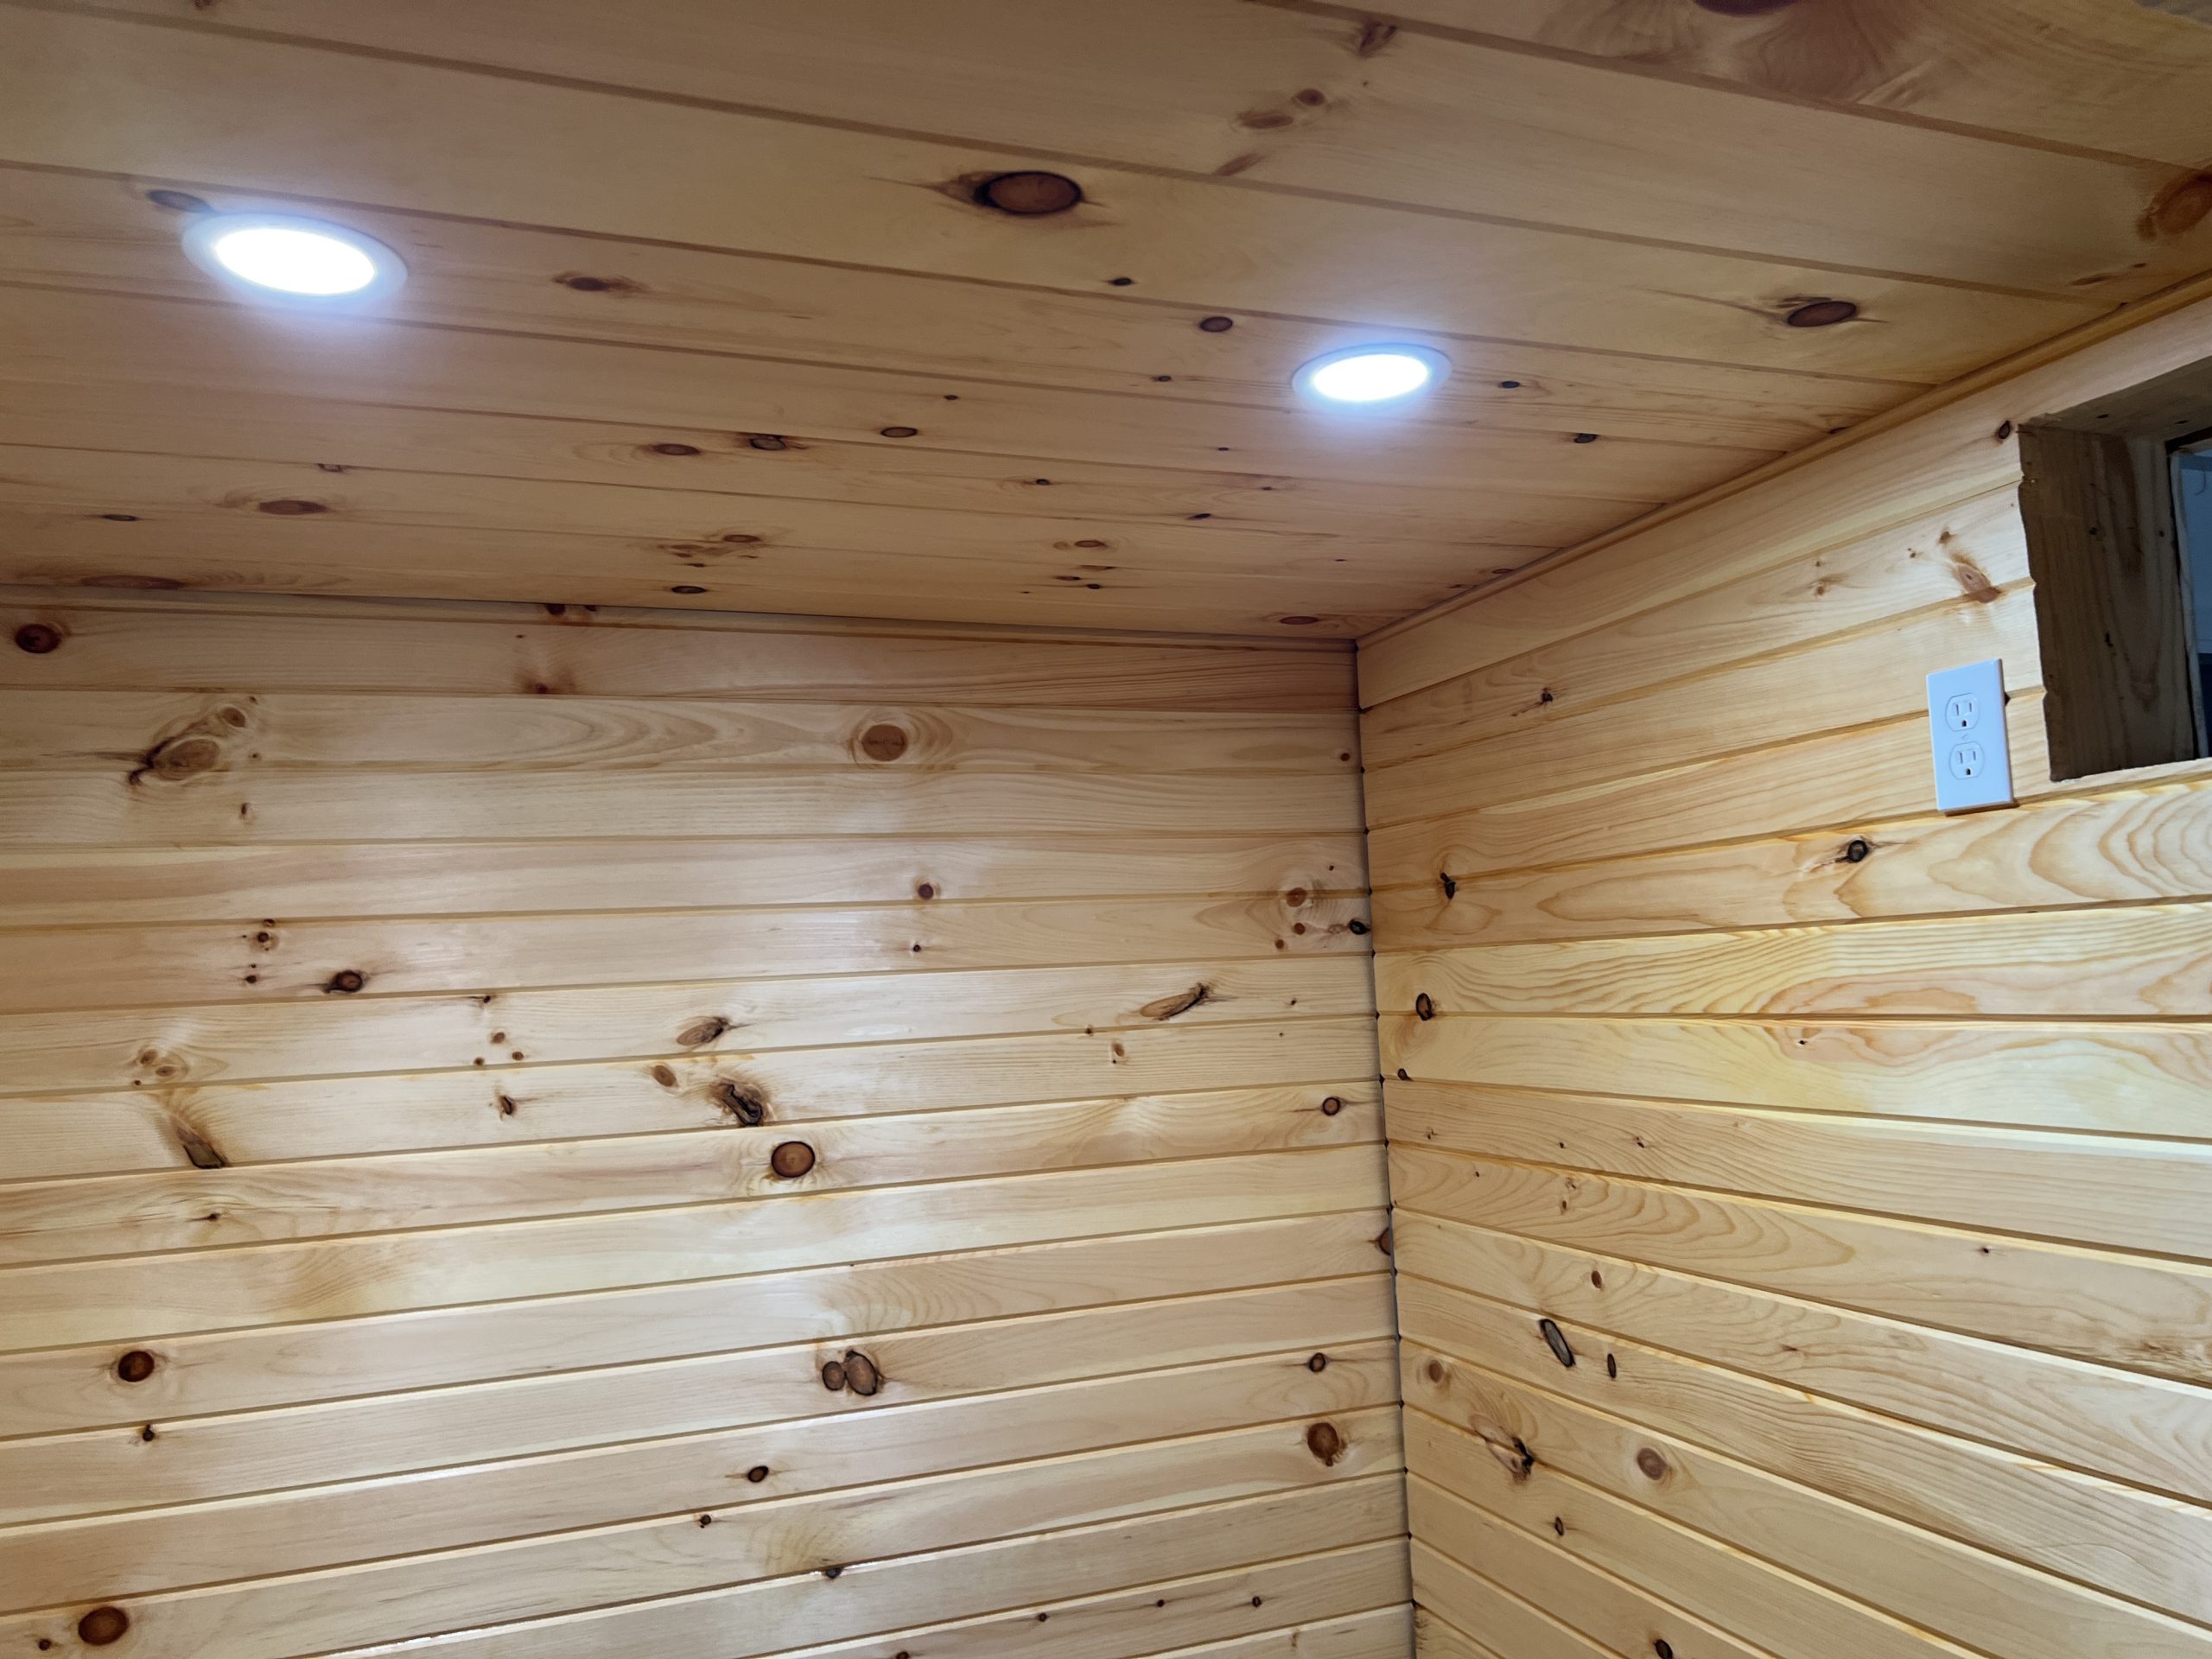 The finished ceiling showing installed can lights and an electrical outlet on the side wall.